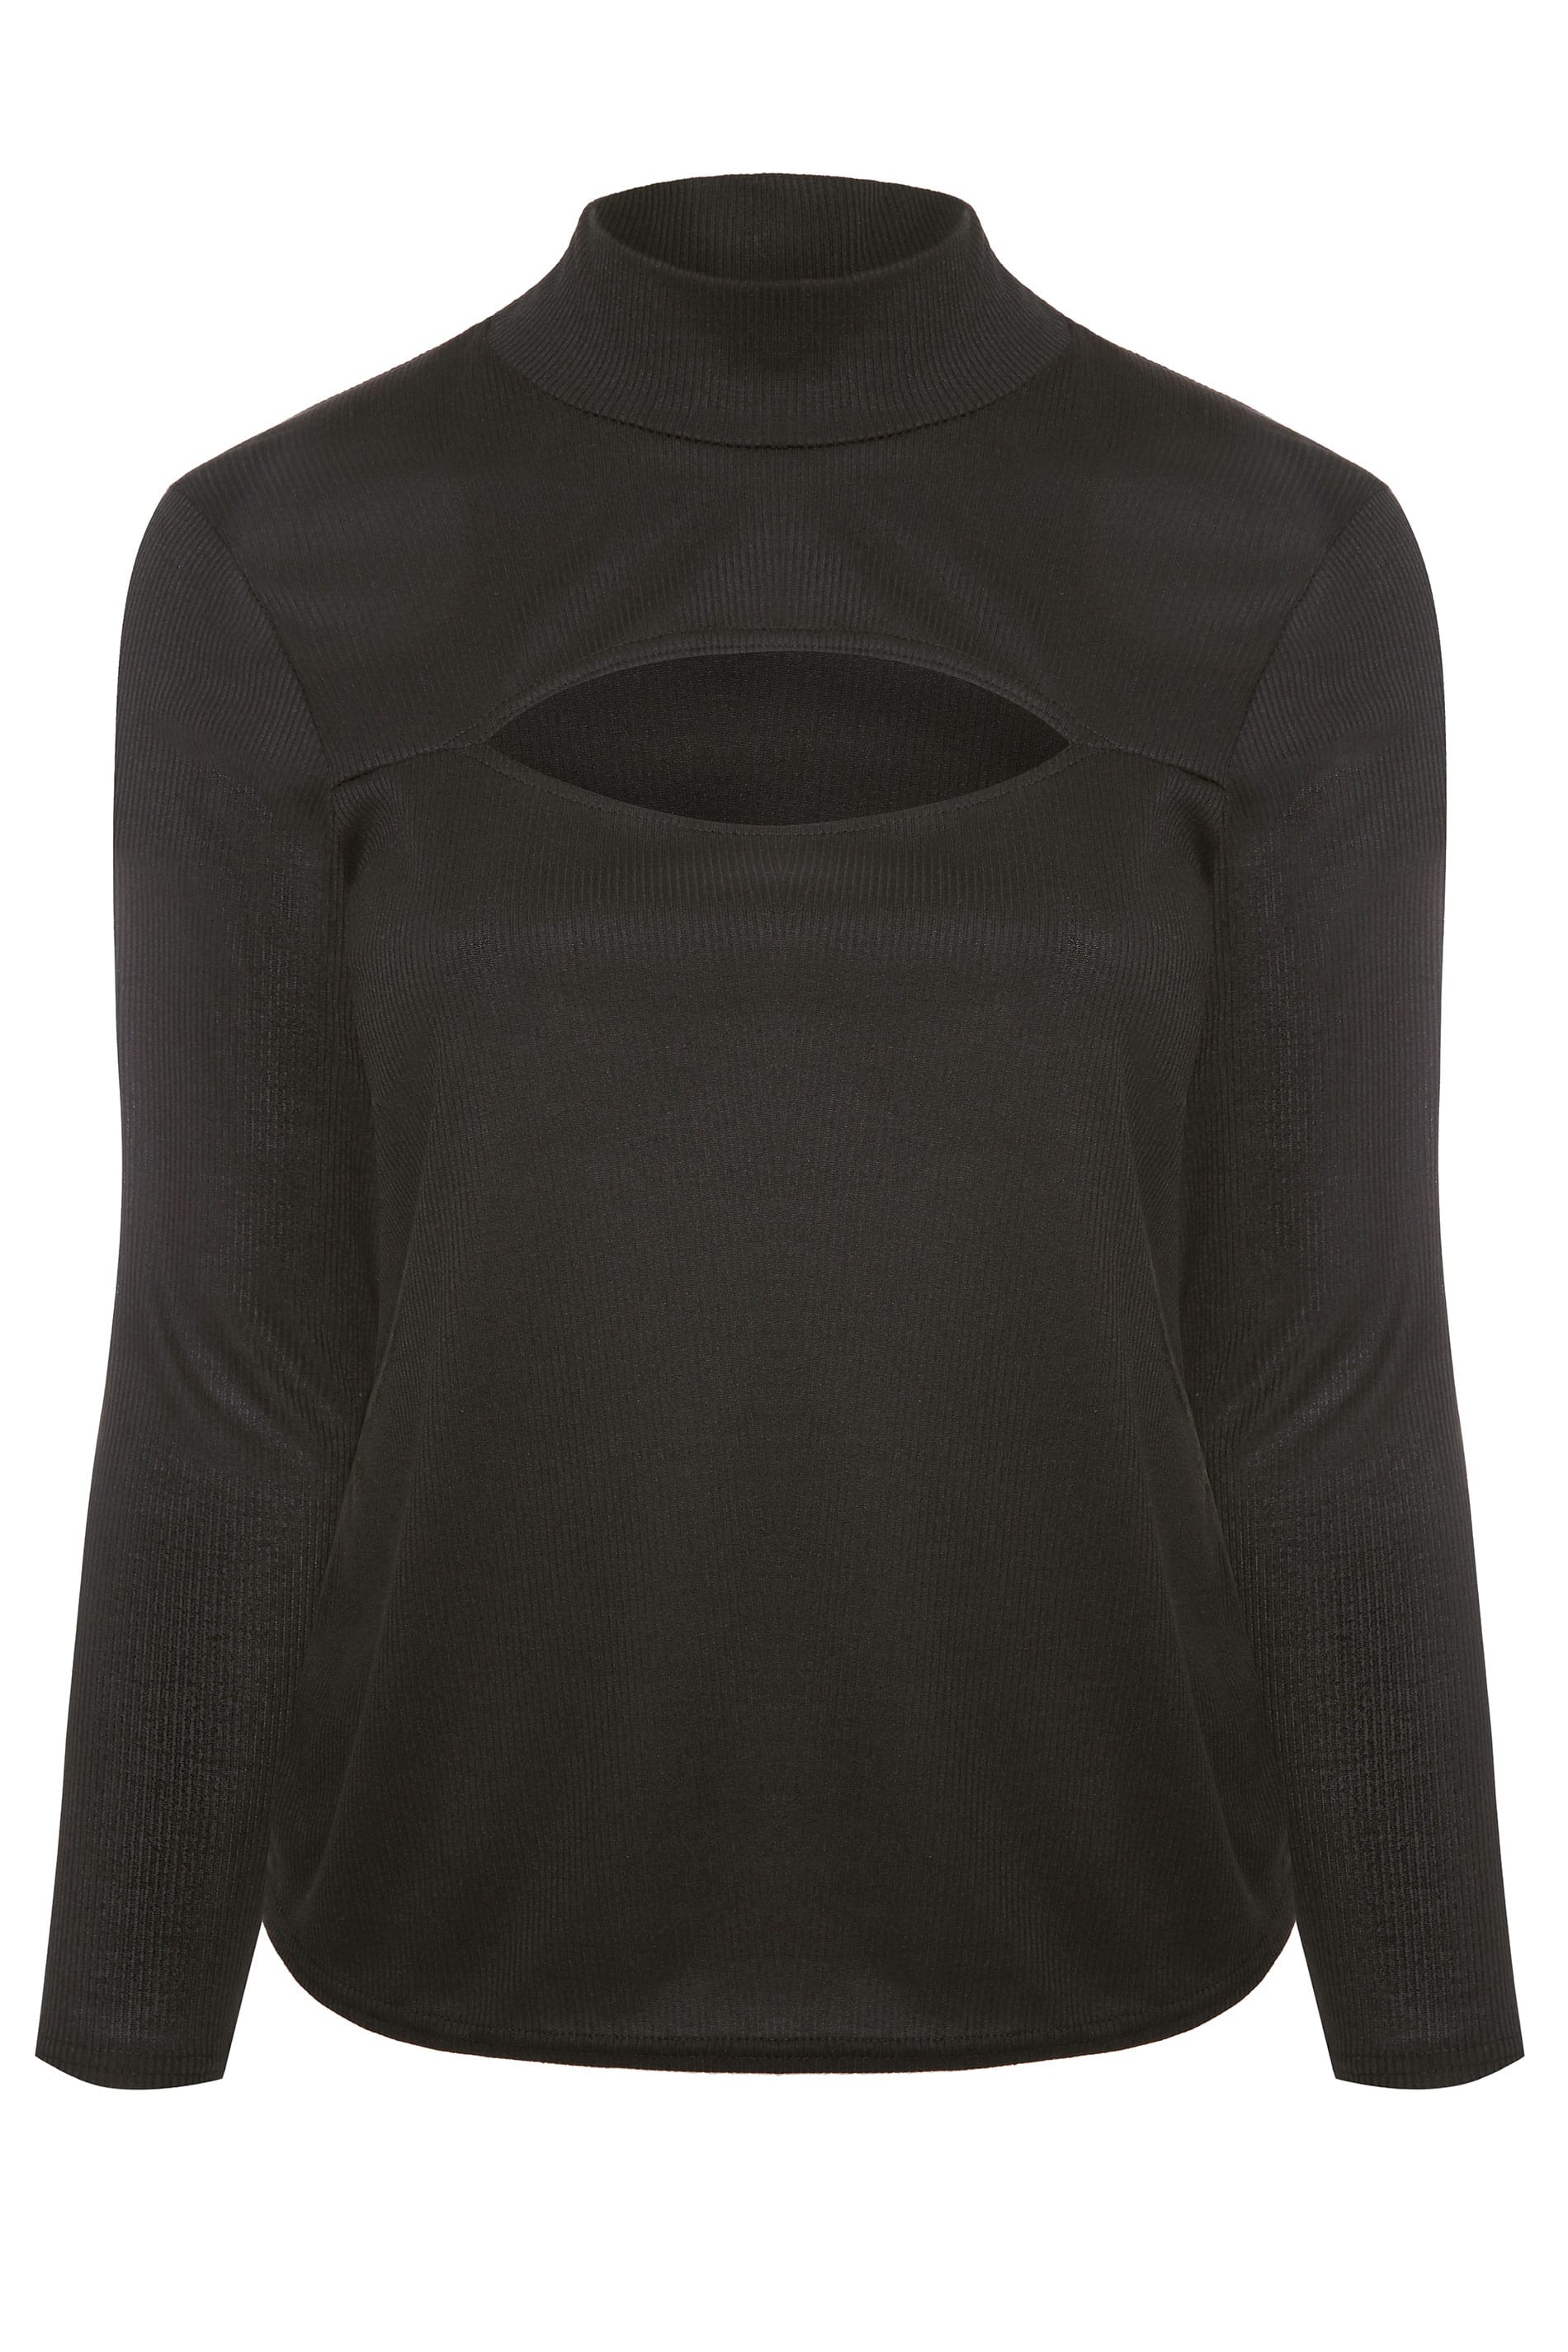 LIMITED COLLECTION Black Ribbed Cut Out Top | Yours Clothing